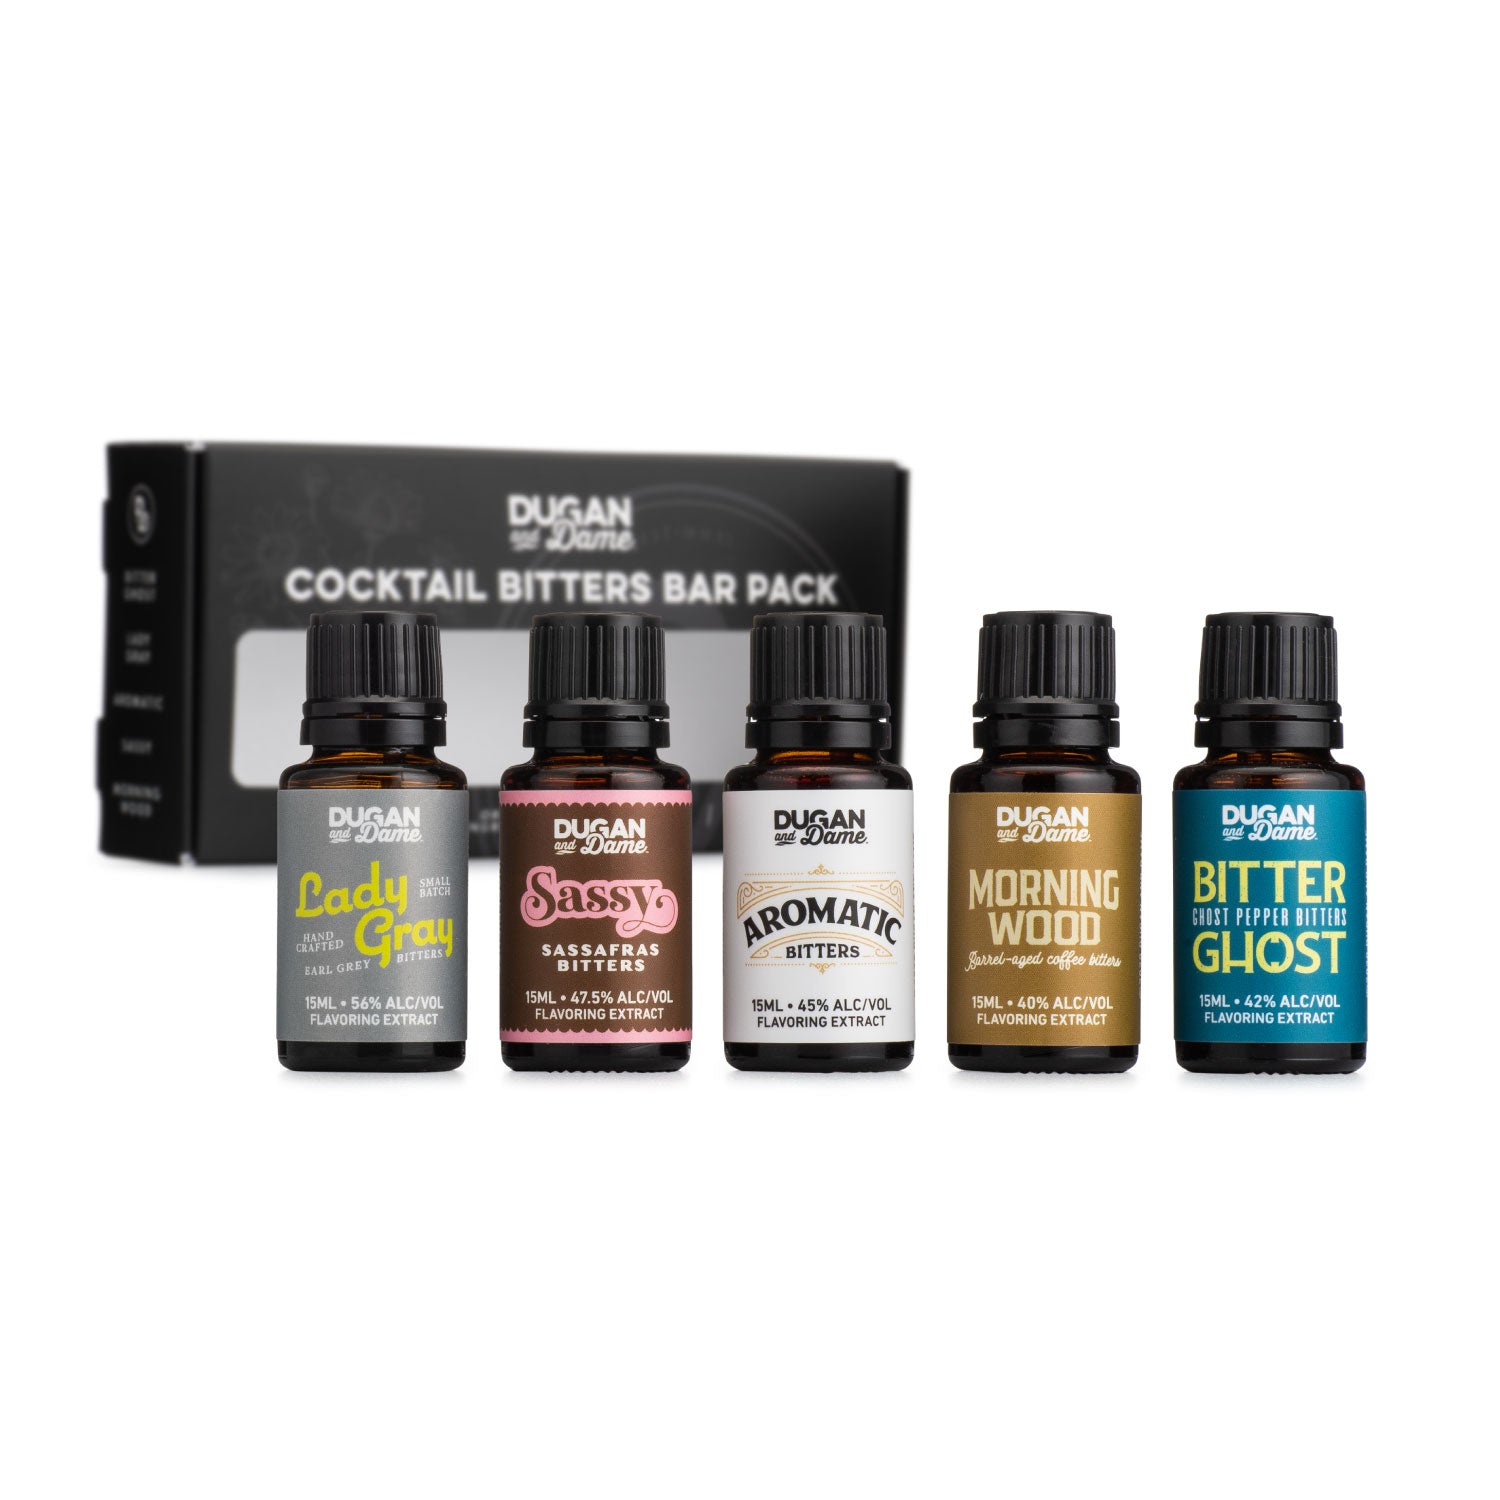 Cocktail Bitters Bar Pack